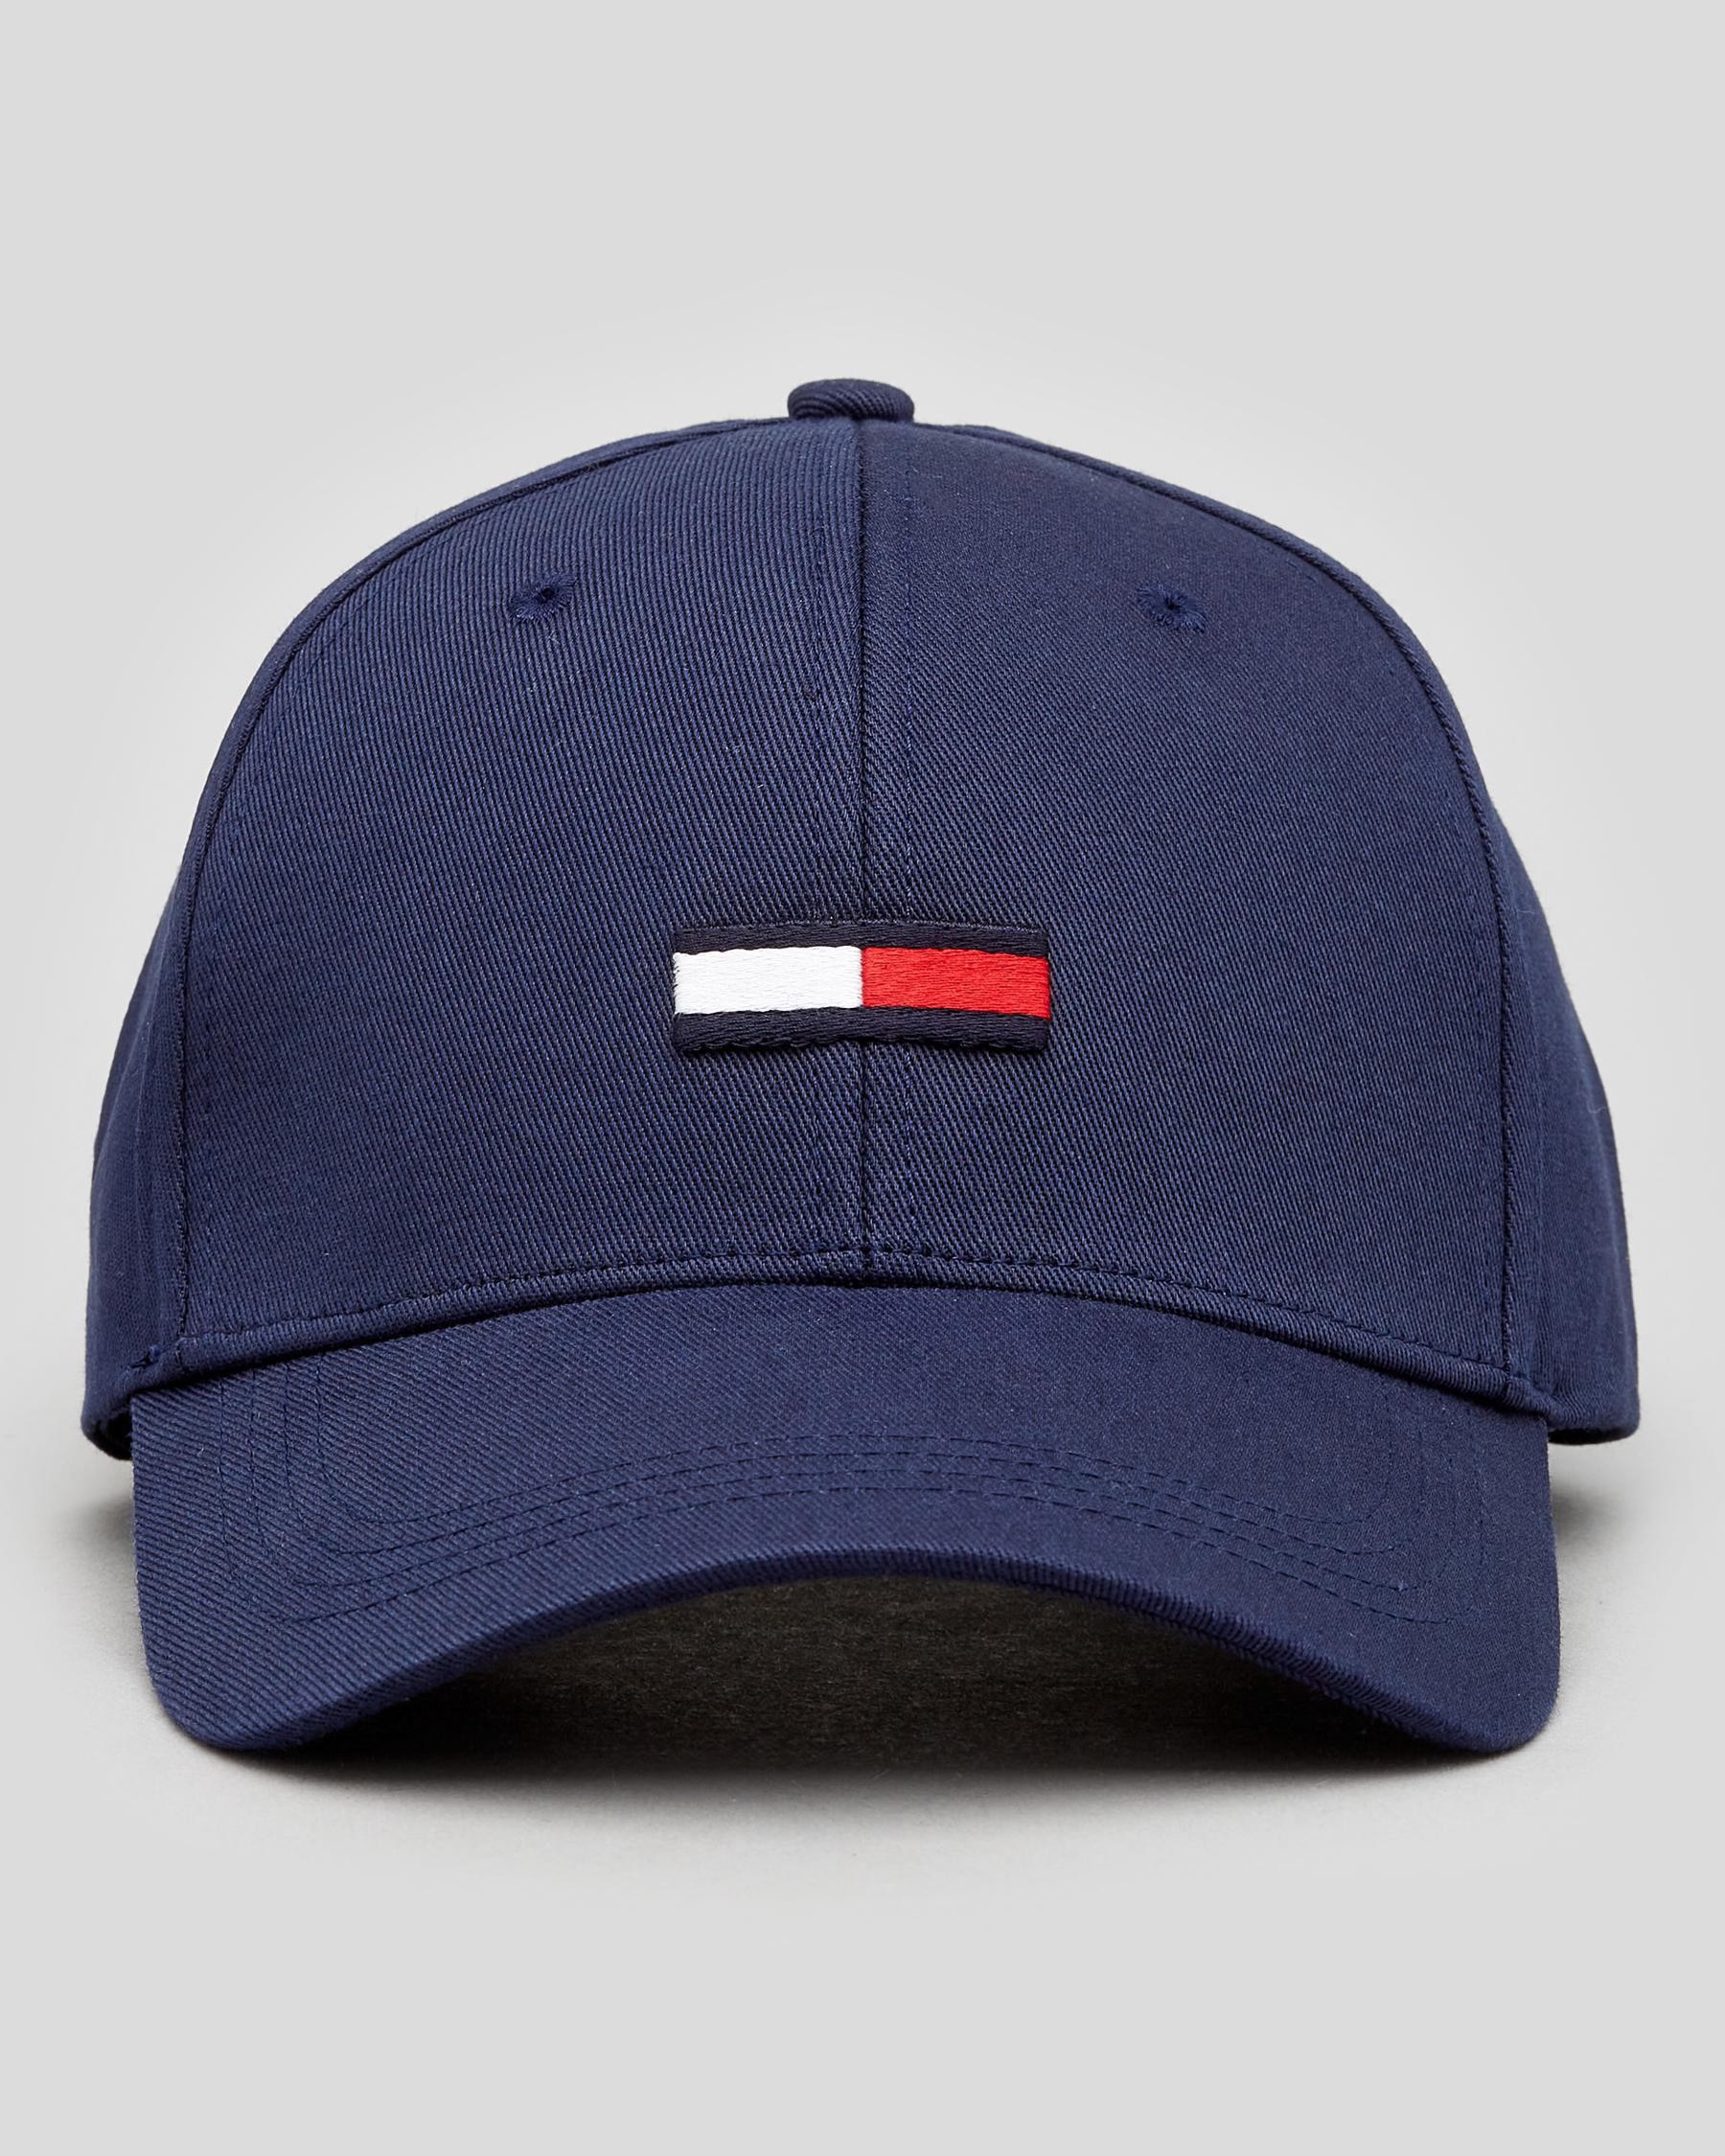 Tommy Hilfiger Shipping Beach Easy In Navy Flag FREE* States TJM City - United Returns - Cap & Twilight